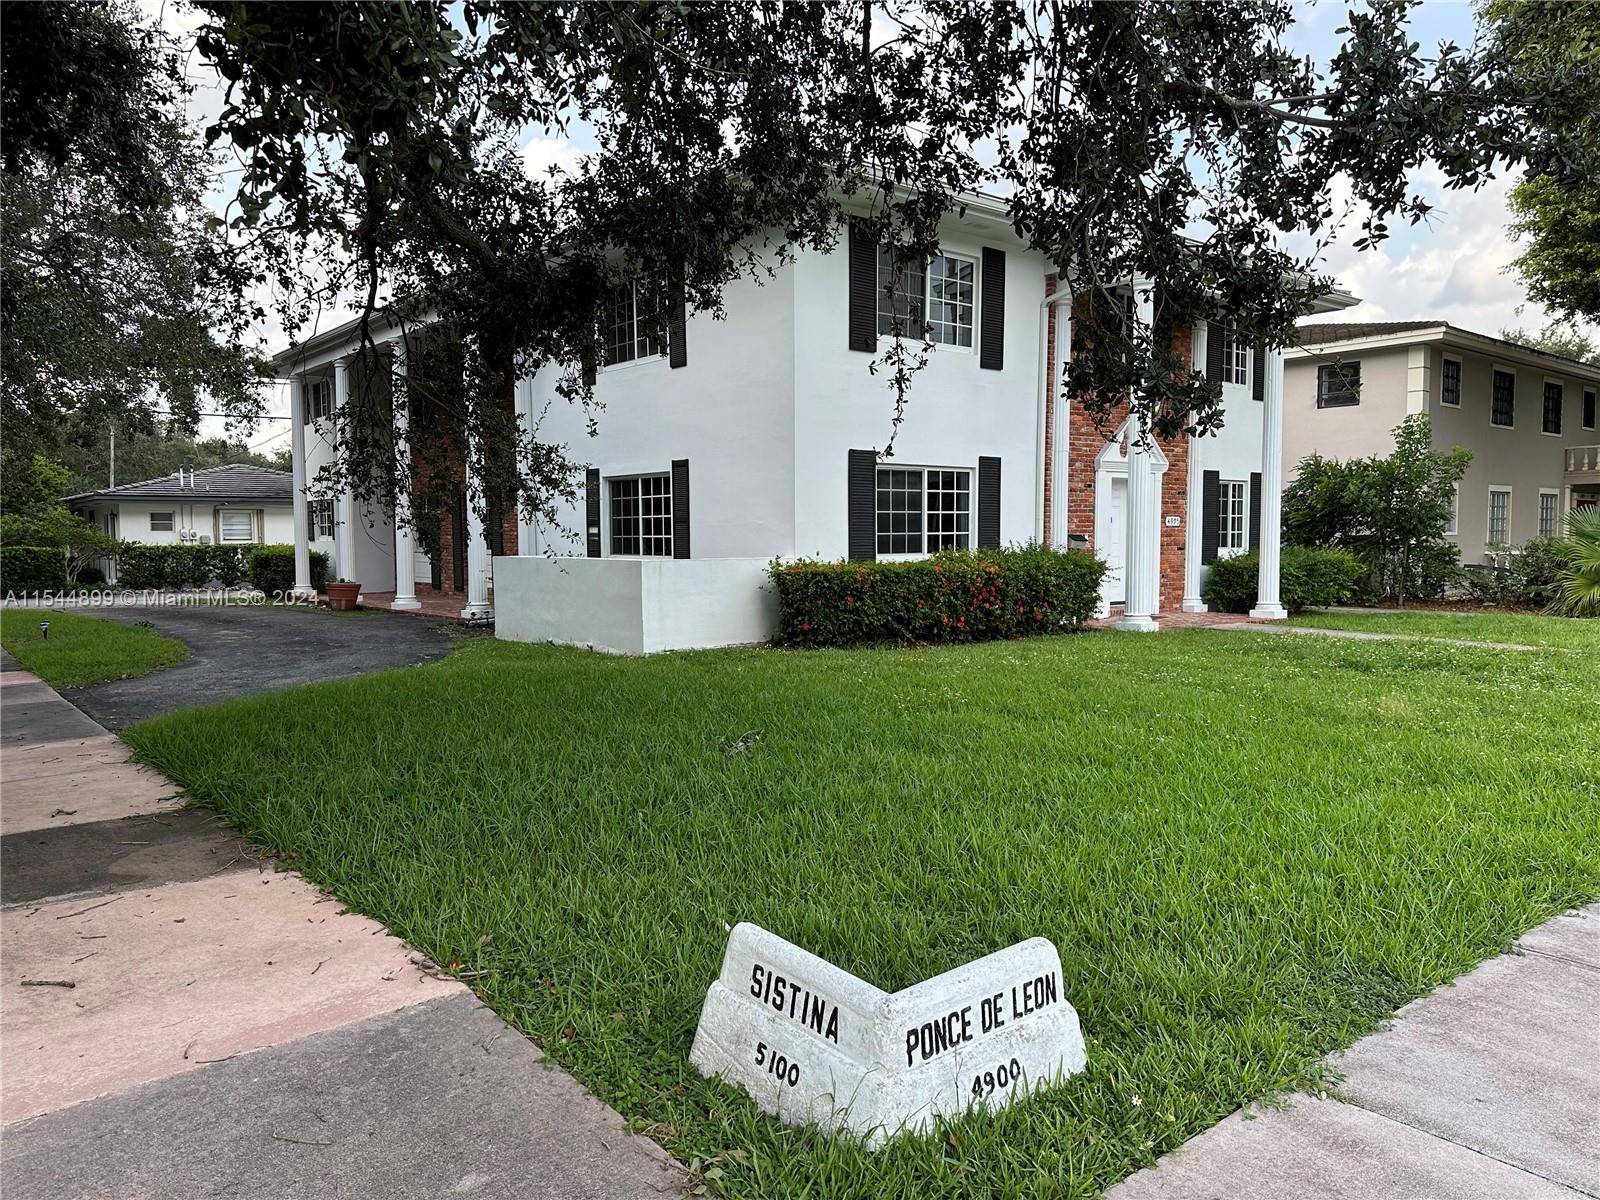 Fabulous Coral Gables location just steps away from the University of Miami, within close proximity of shops, restaurants, and the metro.